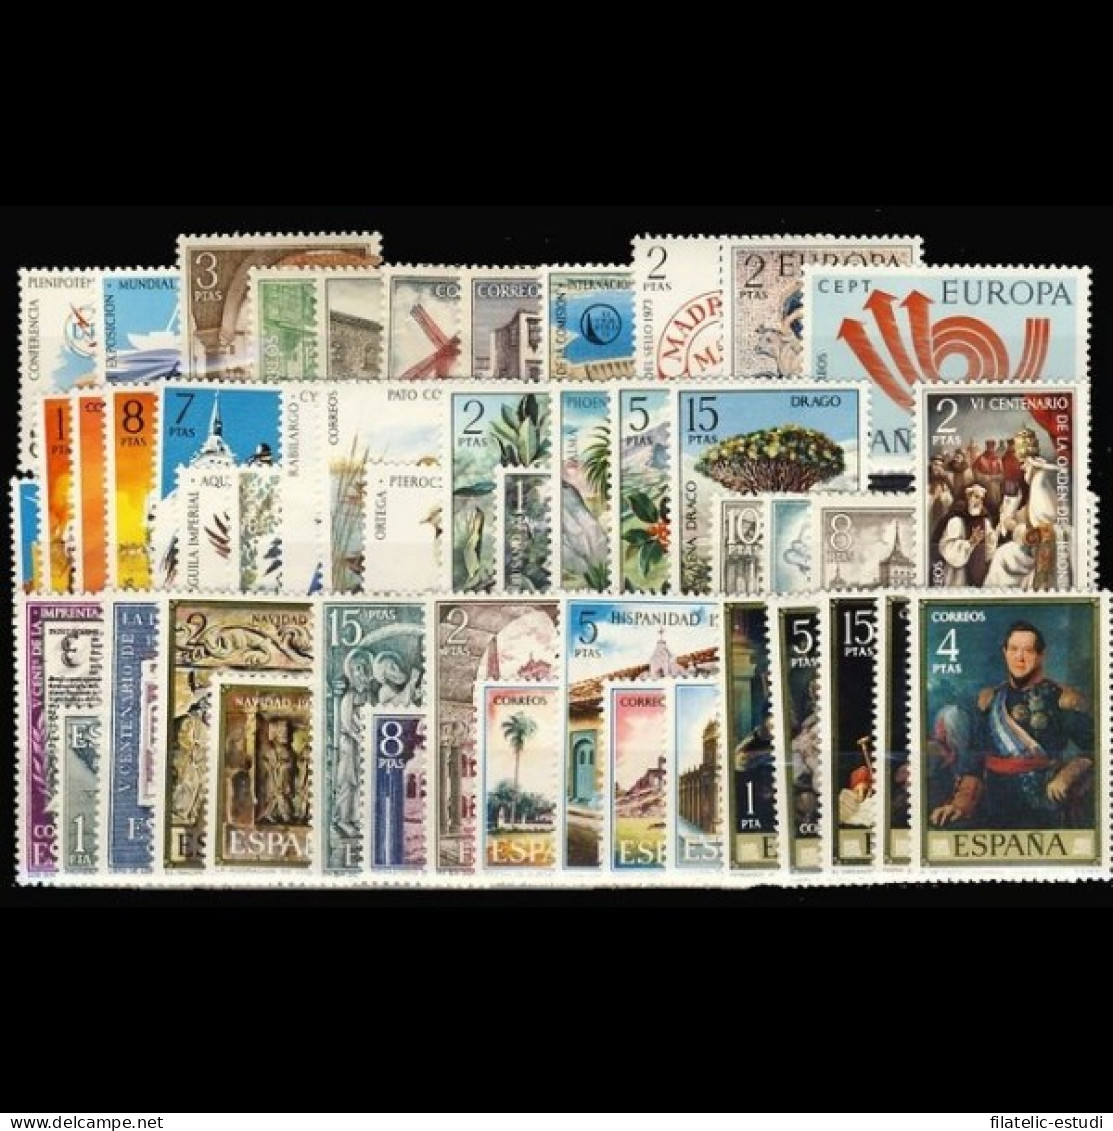 España Spain Año Completo Year Complete 1973 MNH - Annate Complete